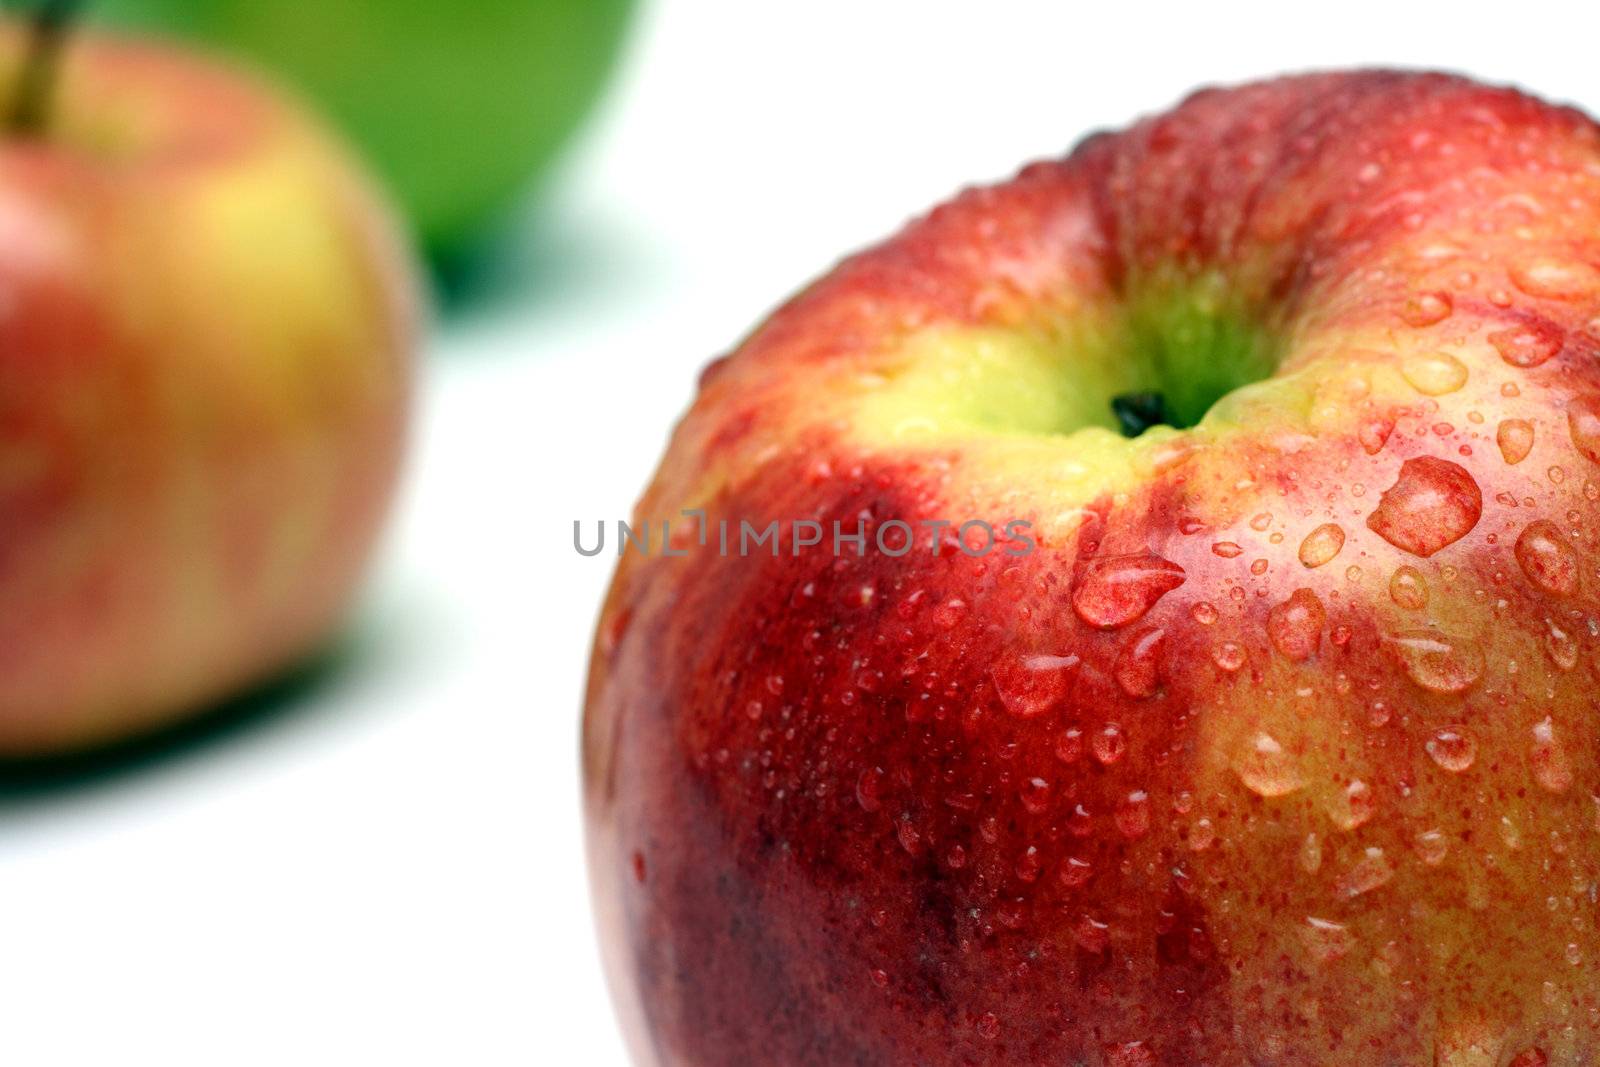 wet apple with water drops close-up